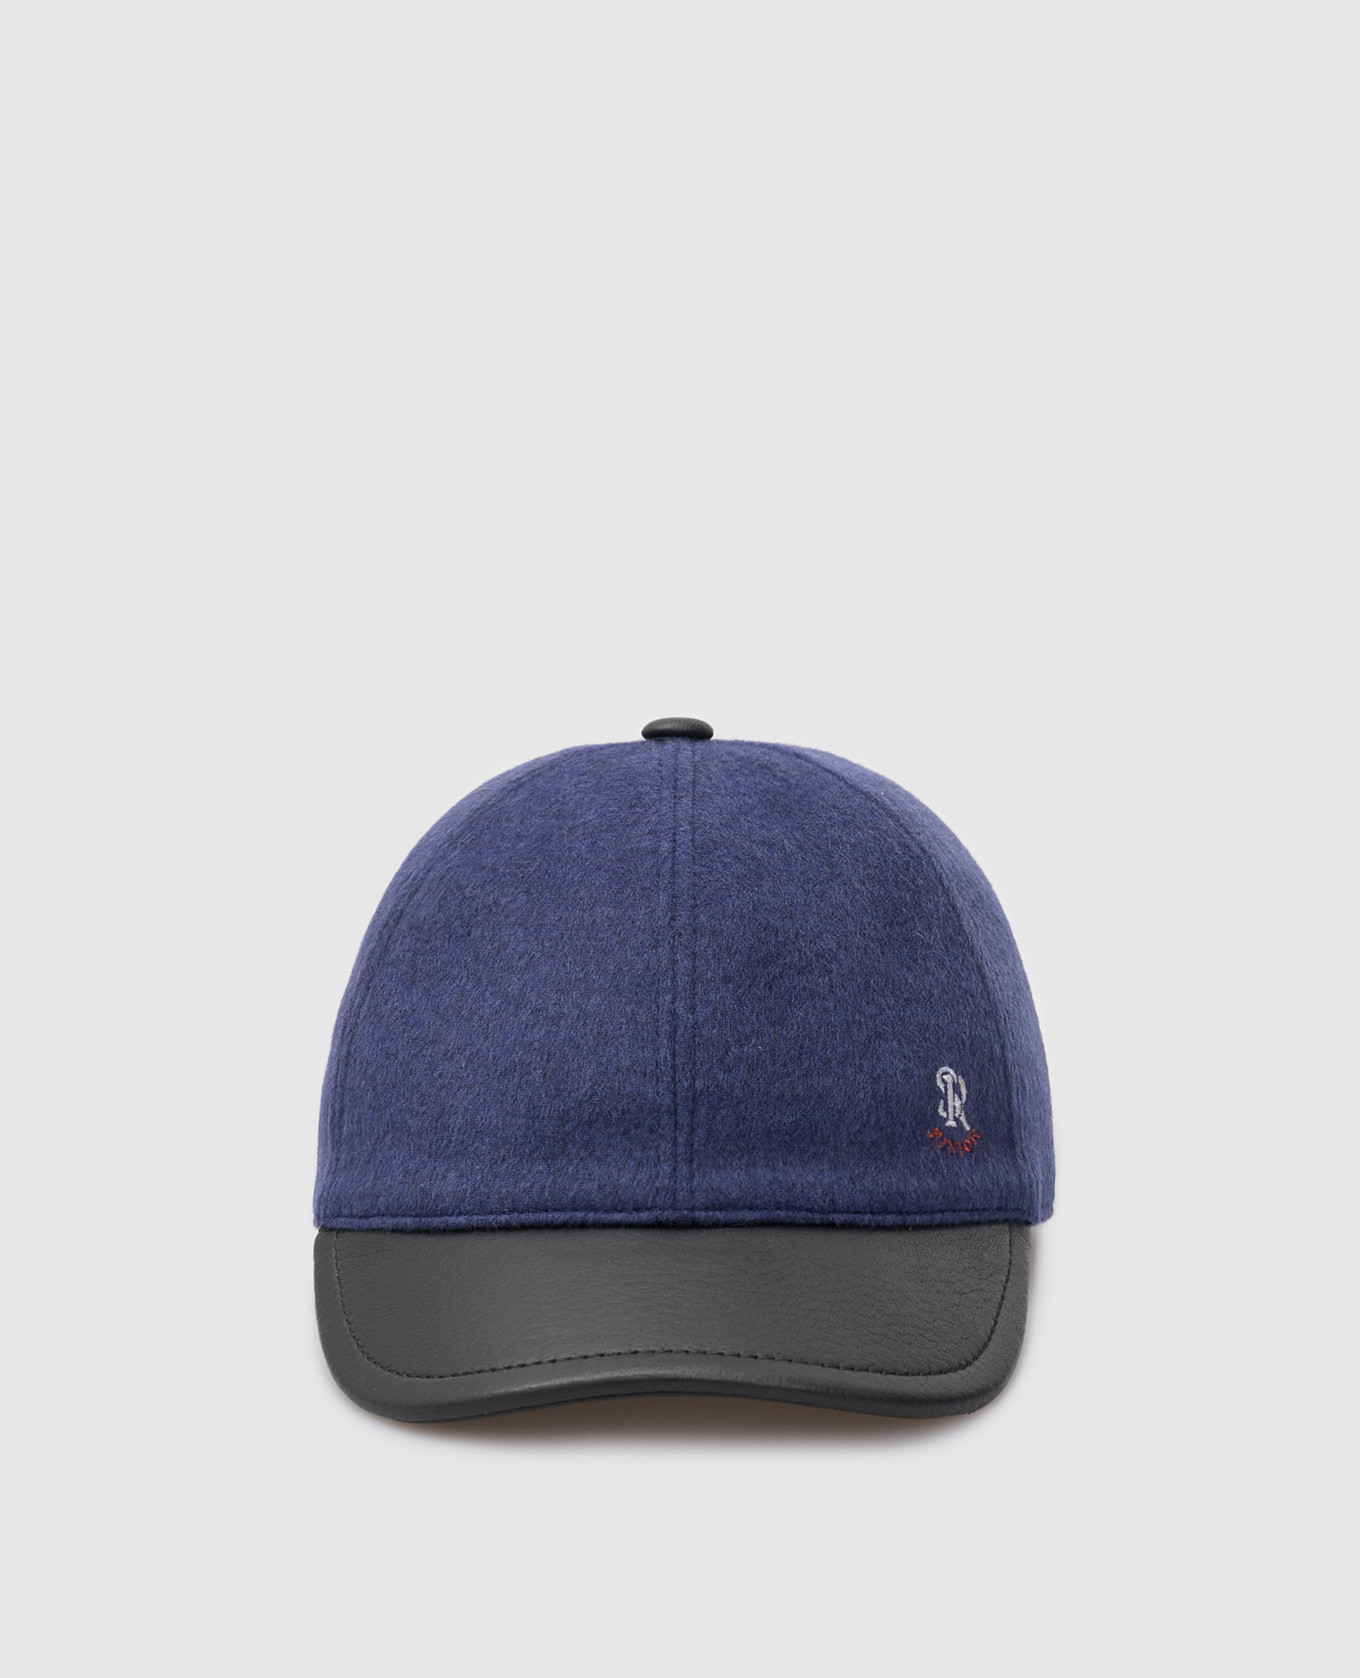 Baby blue wool and leather cap with monogram